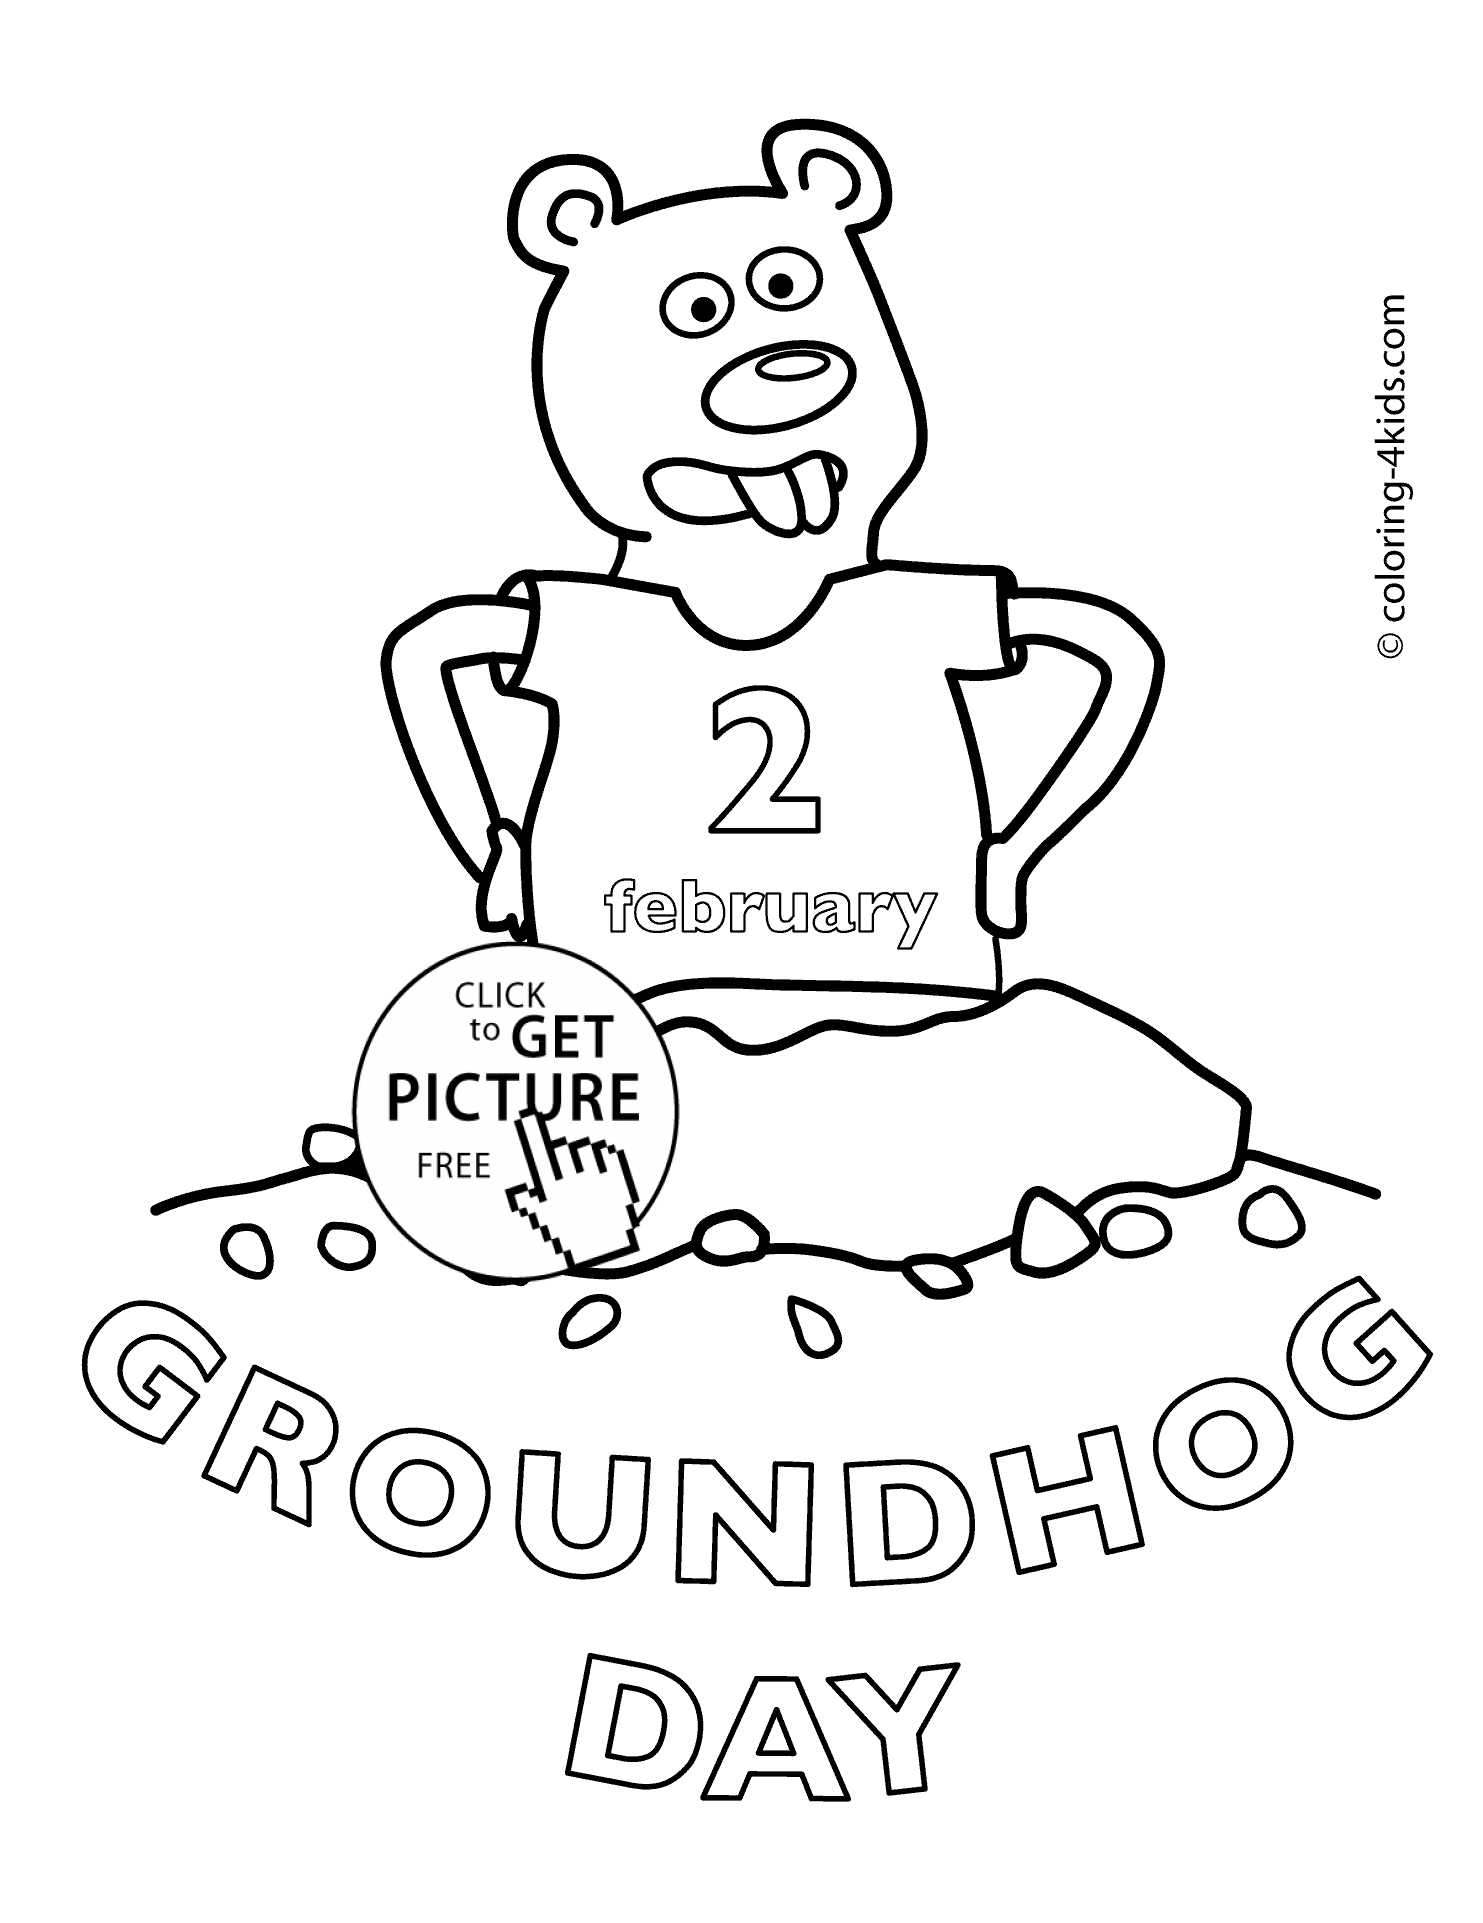 Esl Worksheets for Beginners Adults as Well as Valuable Groundhog Day Printables 8 Free Esl W Unknown